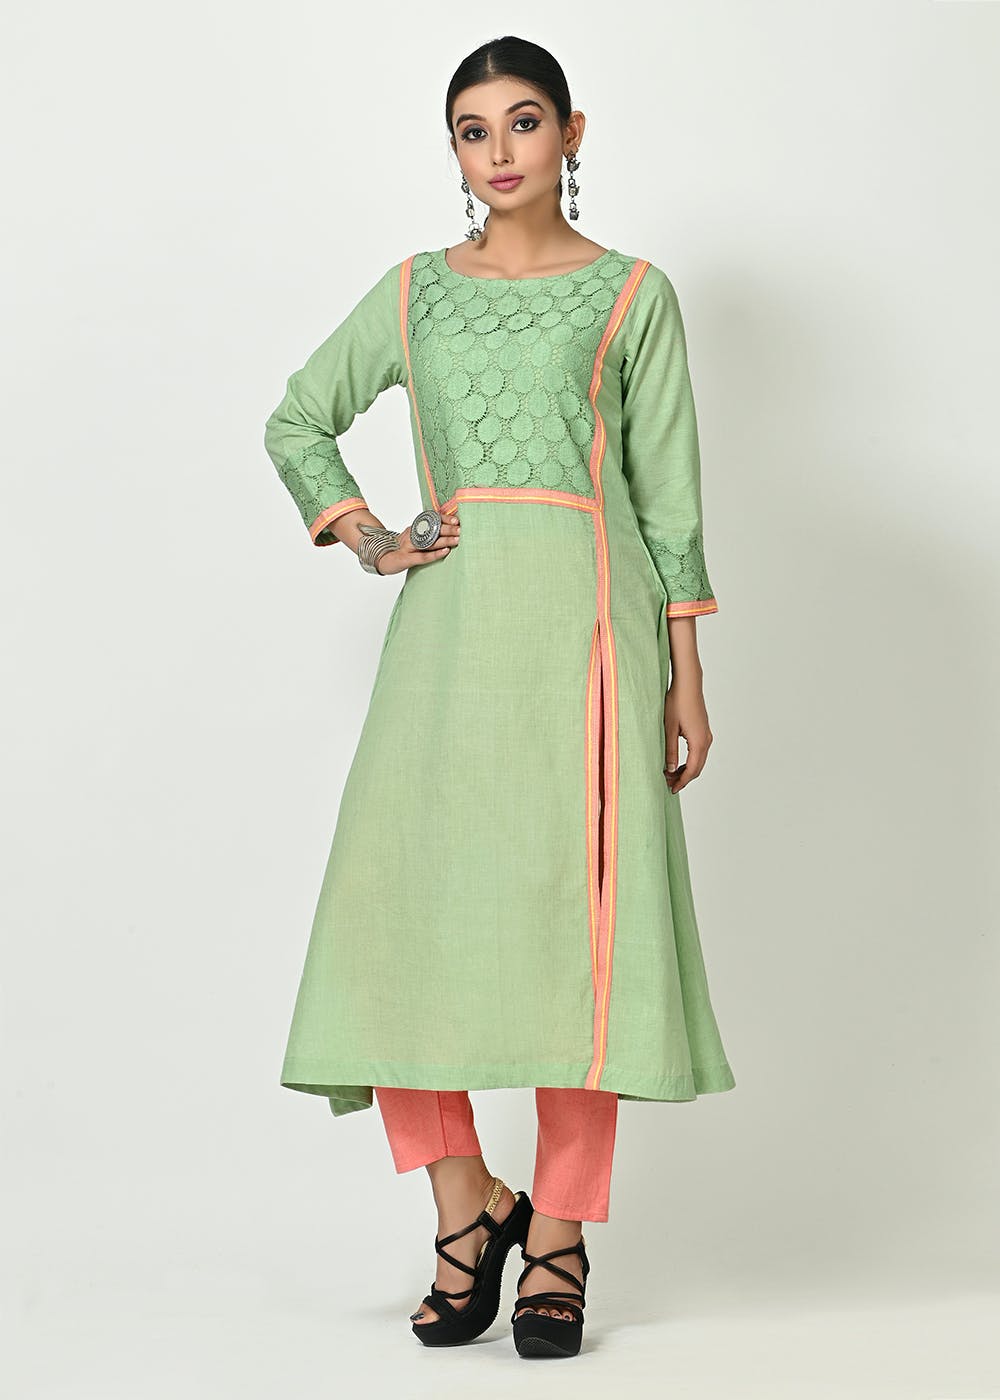 Gown : Pista green georgette embroidered indowestern gown